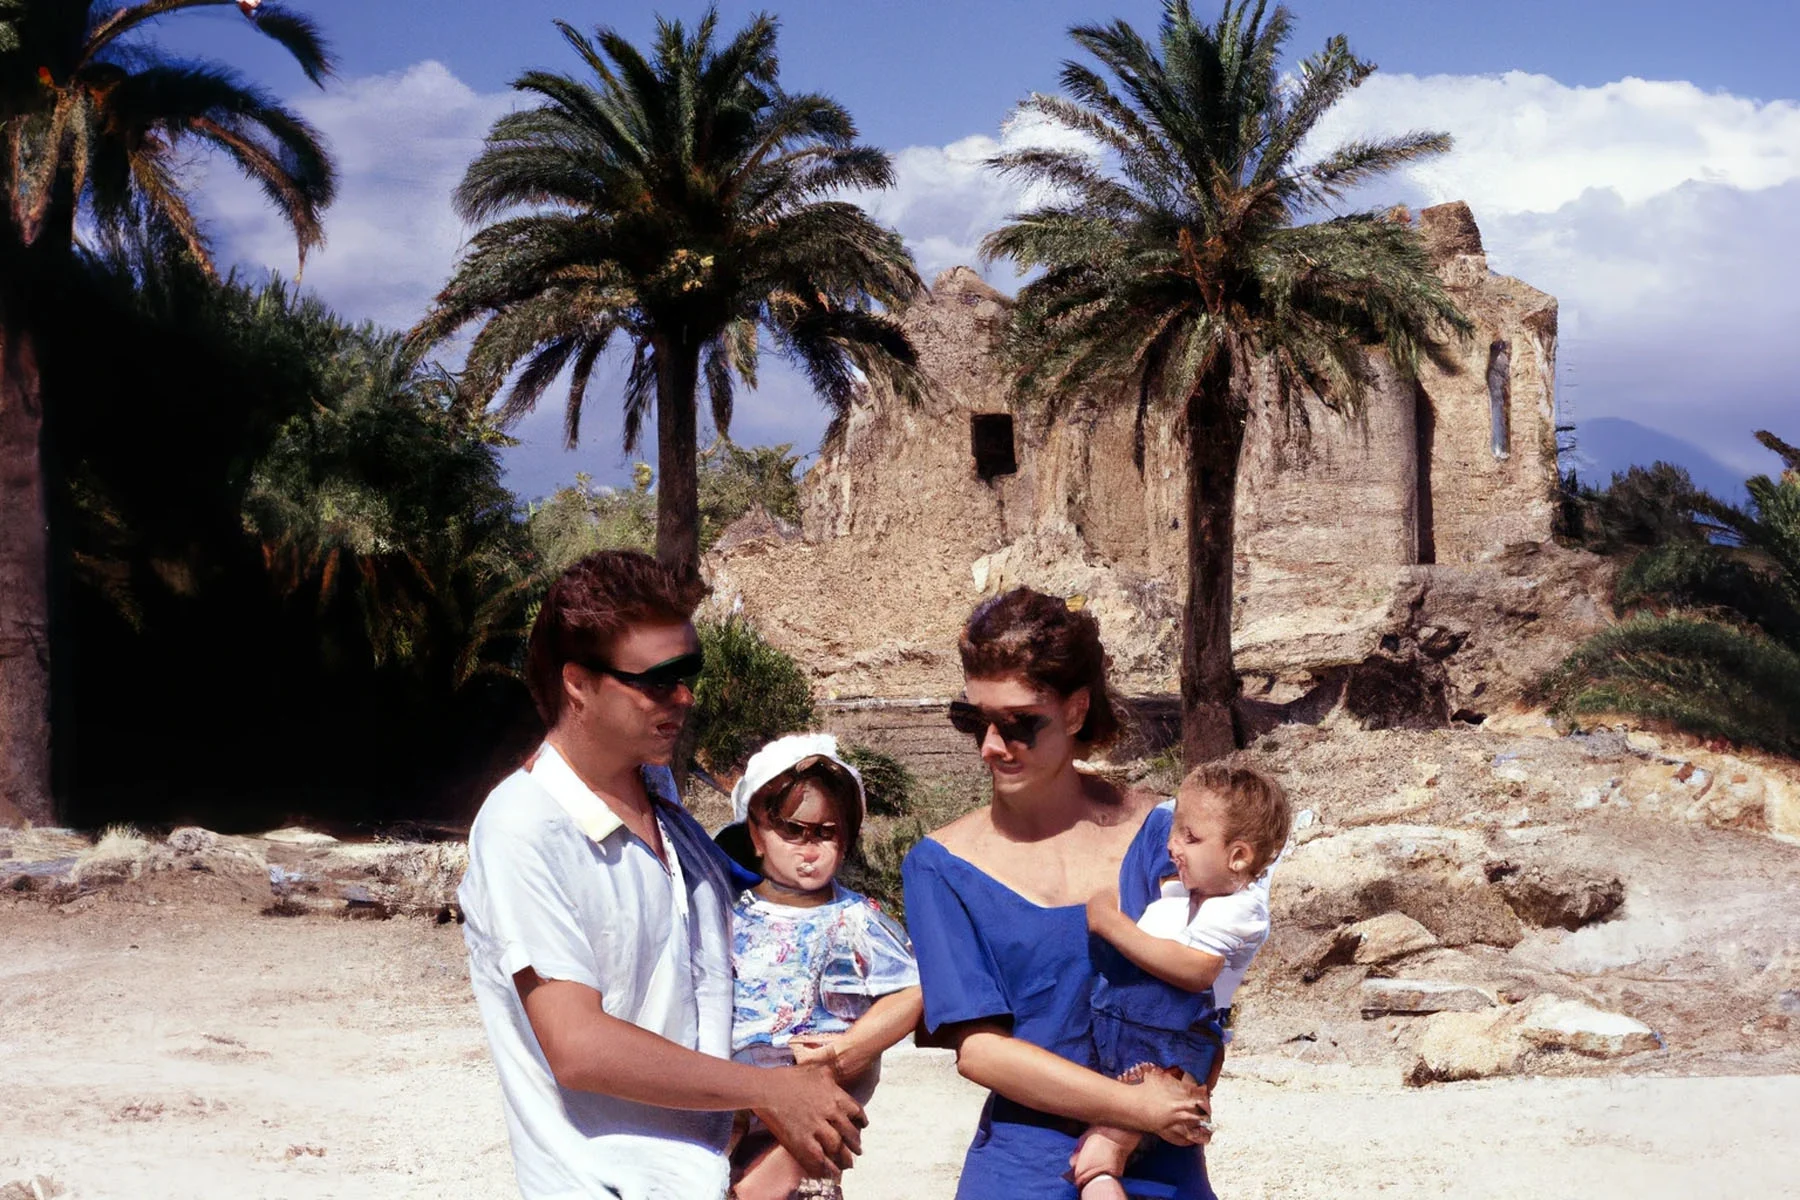 An image that looks like a photograph but is created with the use of Artificial Intelligence. The image has a 90s feel, showing a father holding his young daughter in his arms and a mother holding her son. They are wearing summer clothes and sunglasses, standing in front of some ruins and palm trees on a sunny summer’s day.